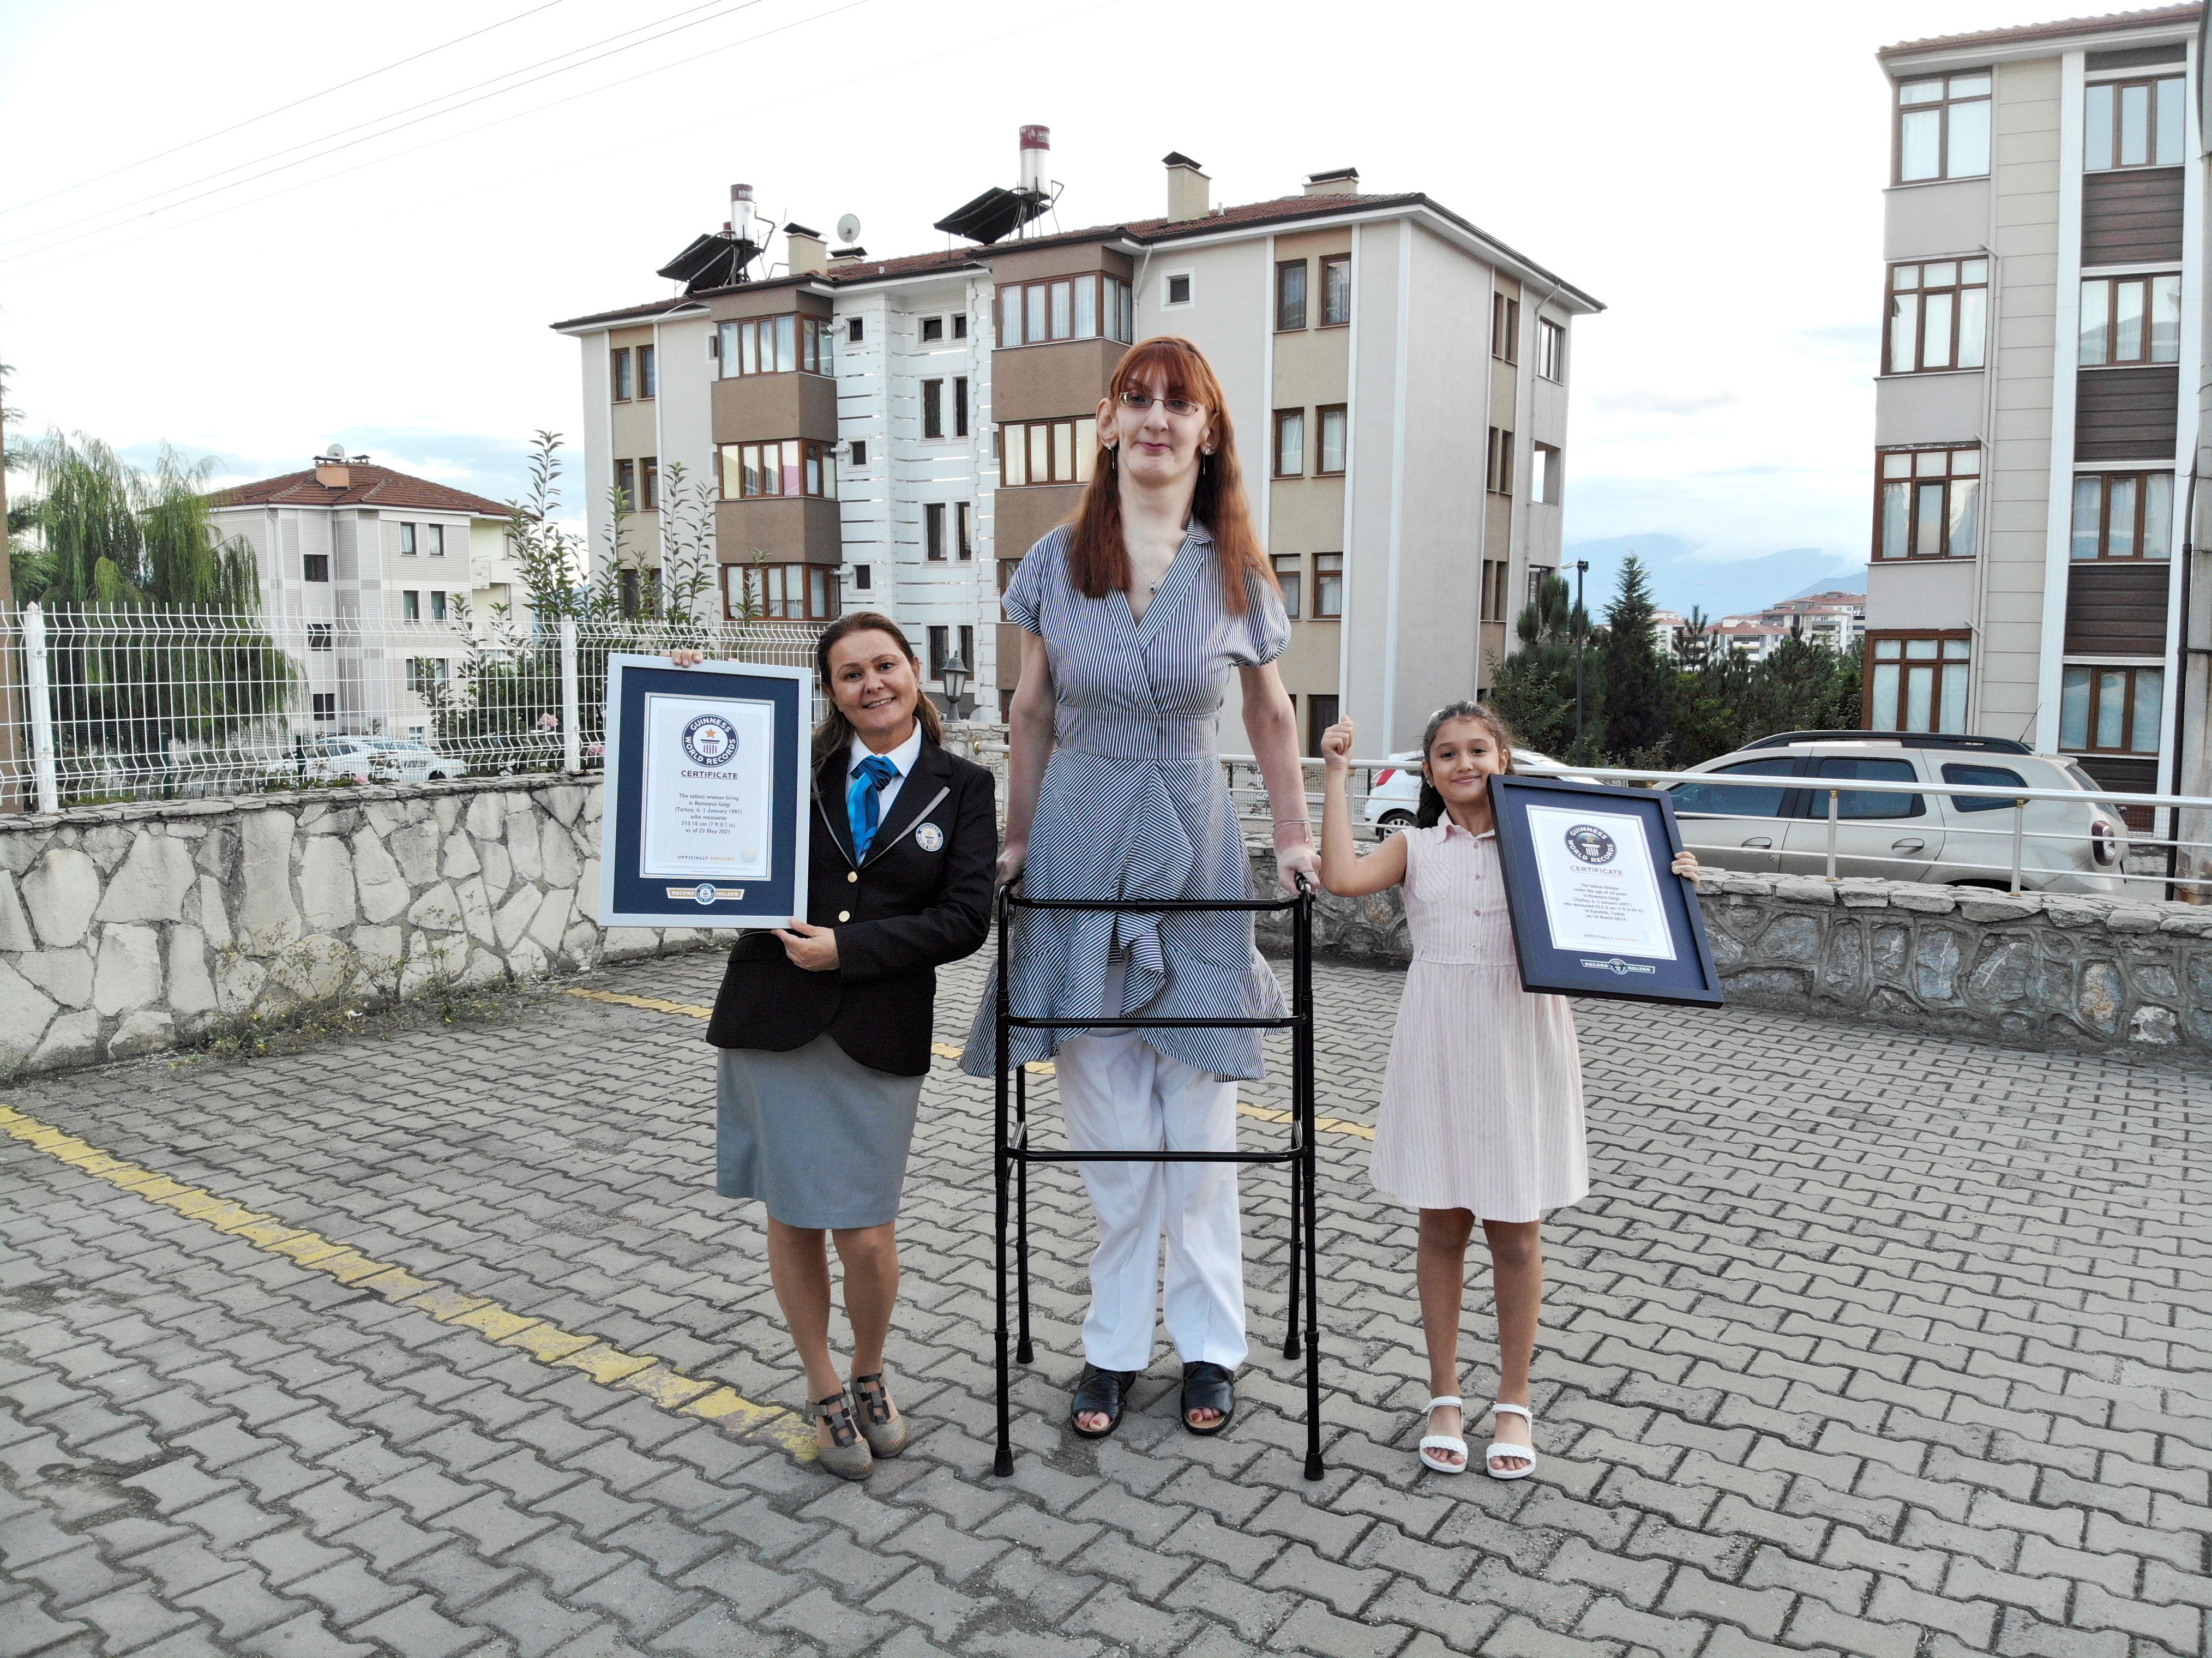 Rumeysa Gelgi is the tallest woman in the world, not the woman seen in this  video - FACTLY